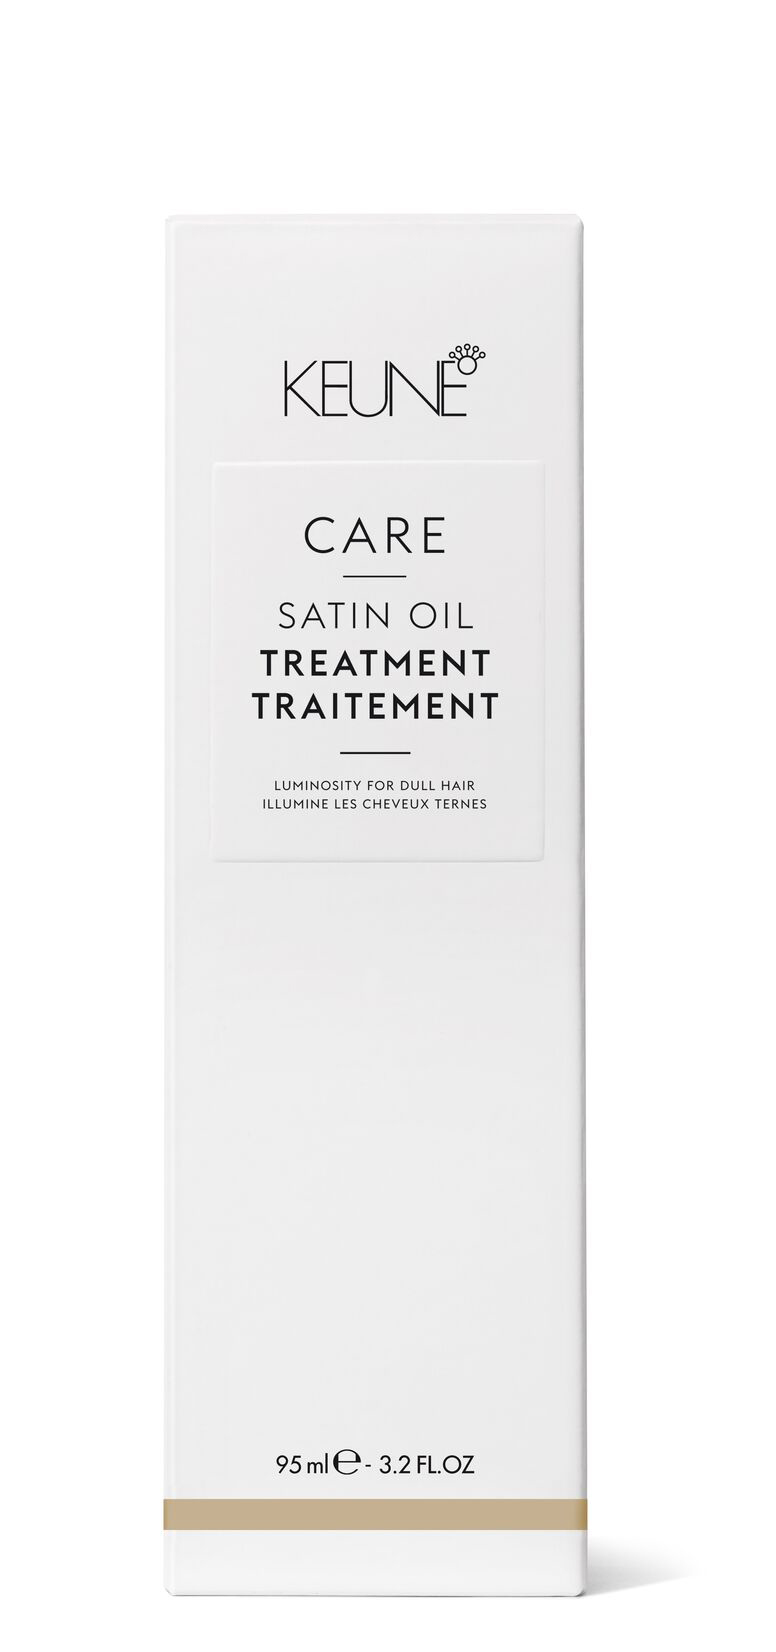 Discover CARE SATIN OIL TREATMENT, the ideal hair care product for all hair types. With anti-frizz effect, easy to apply, and non-greasy. Nourishes split ends. Order hair oil on keune.ch.